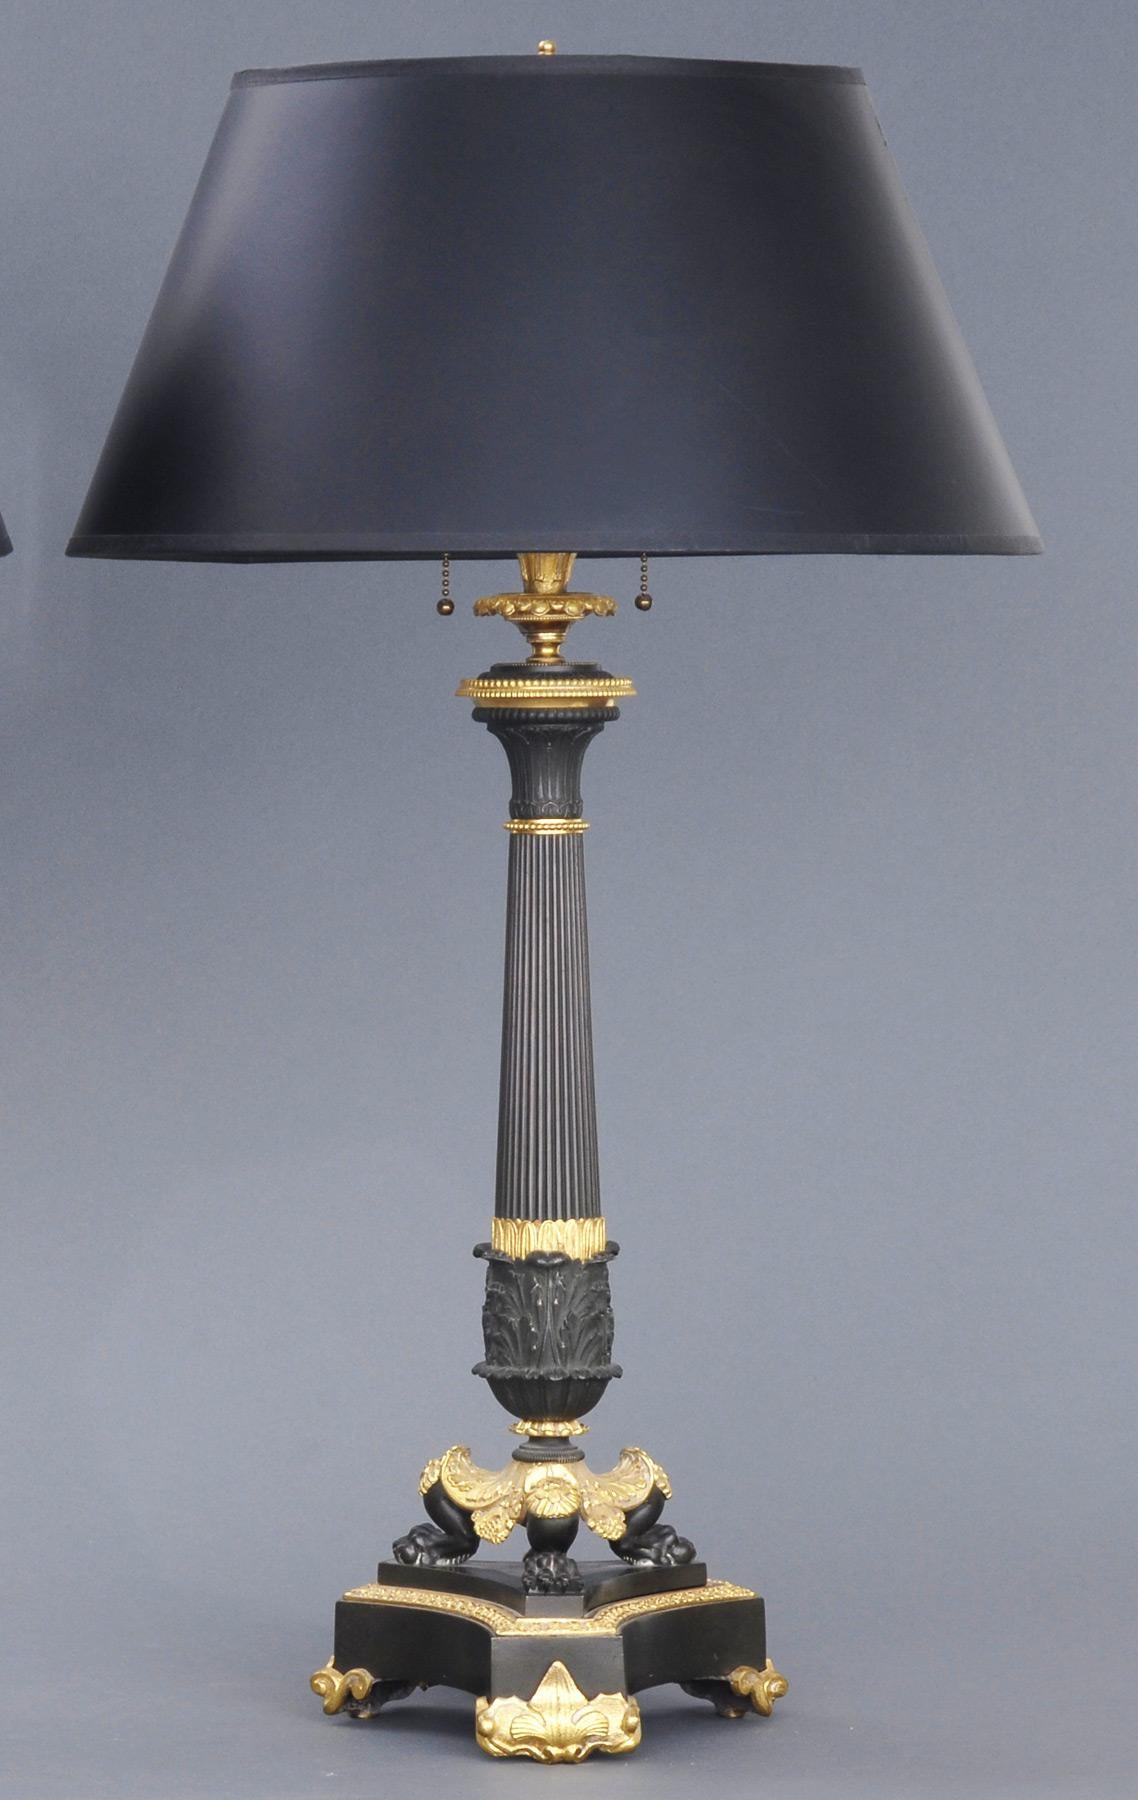 Pair of exceptional French Charles X period bronze and ormolu candlestick lamps with a tapering reeded and acanthus cast column on a tripod base with claw feet, stepped base on ormolu fleur-de-lis feet.